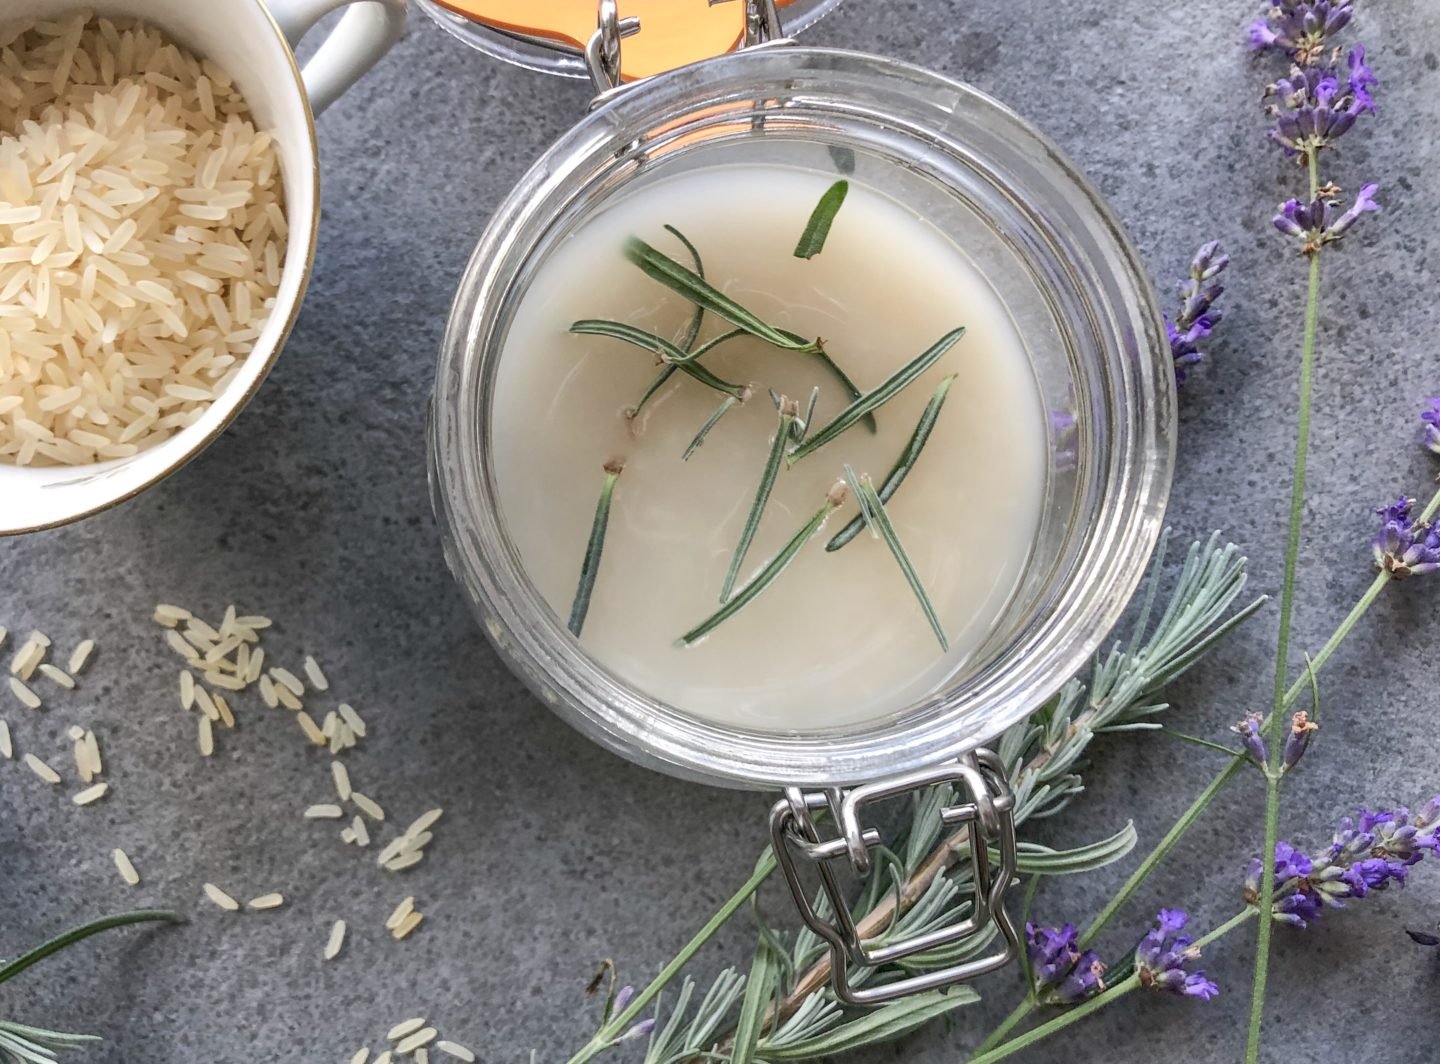 Rice water rinse, add lavender from your garden just strain it out again with the rice